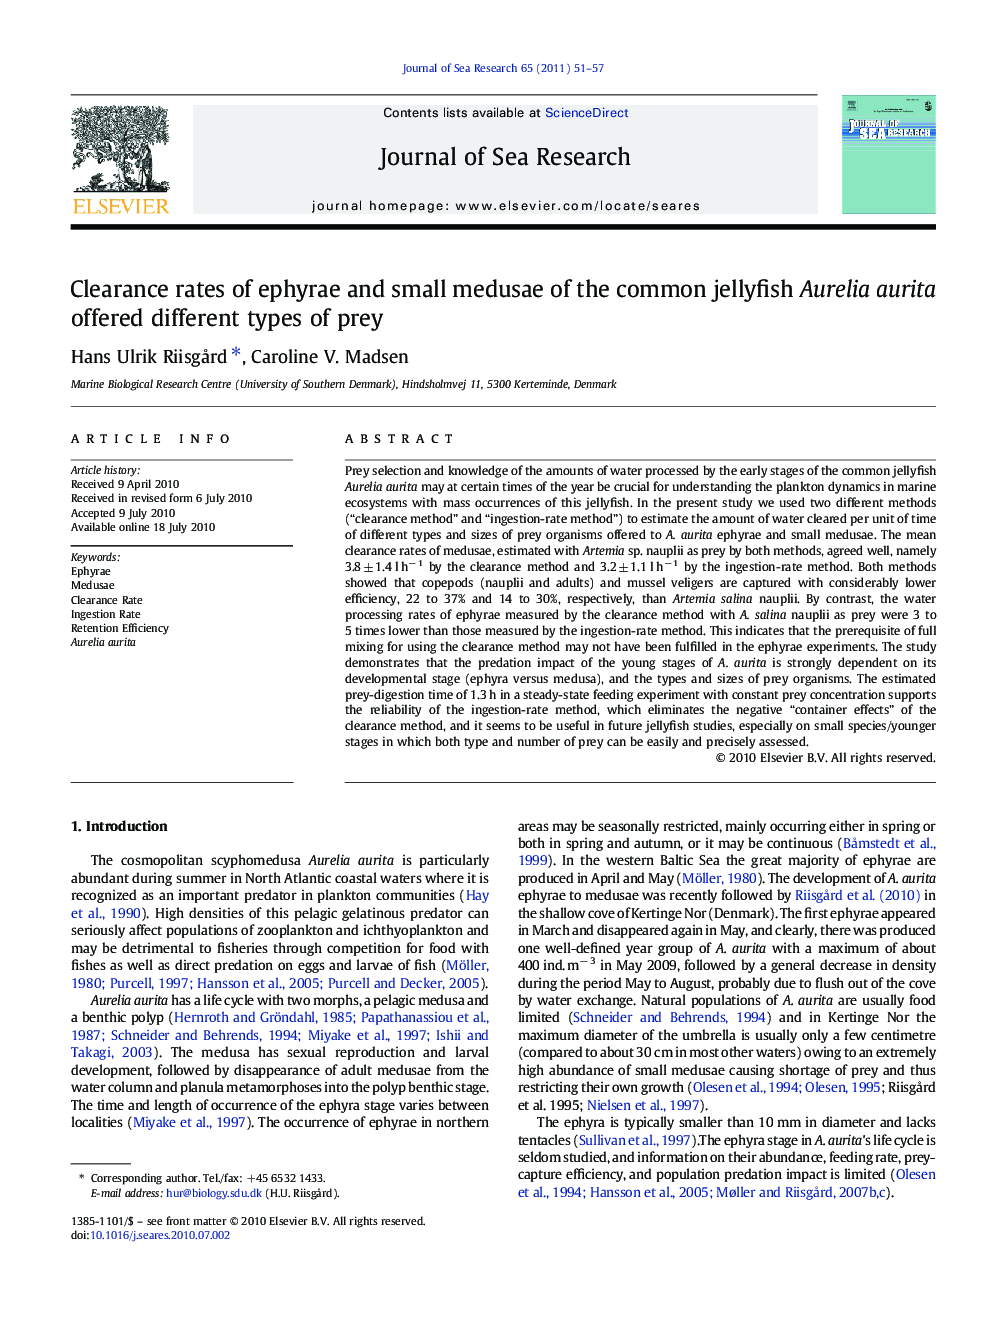 Clearance rates of ephyrae and small medusae of the common jellyfish Aurelia aurita offered different types of prey